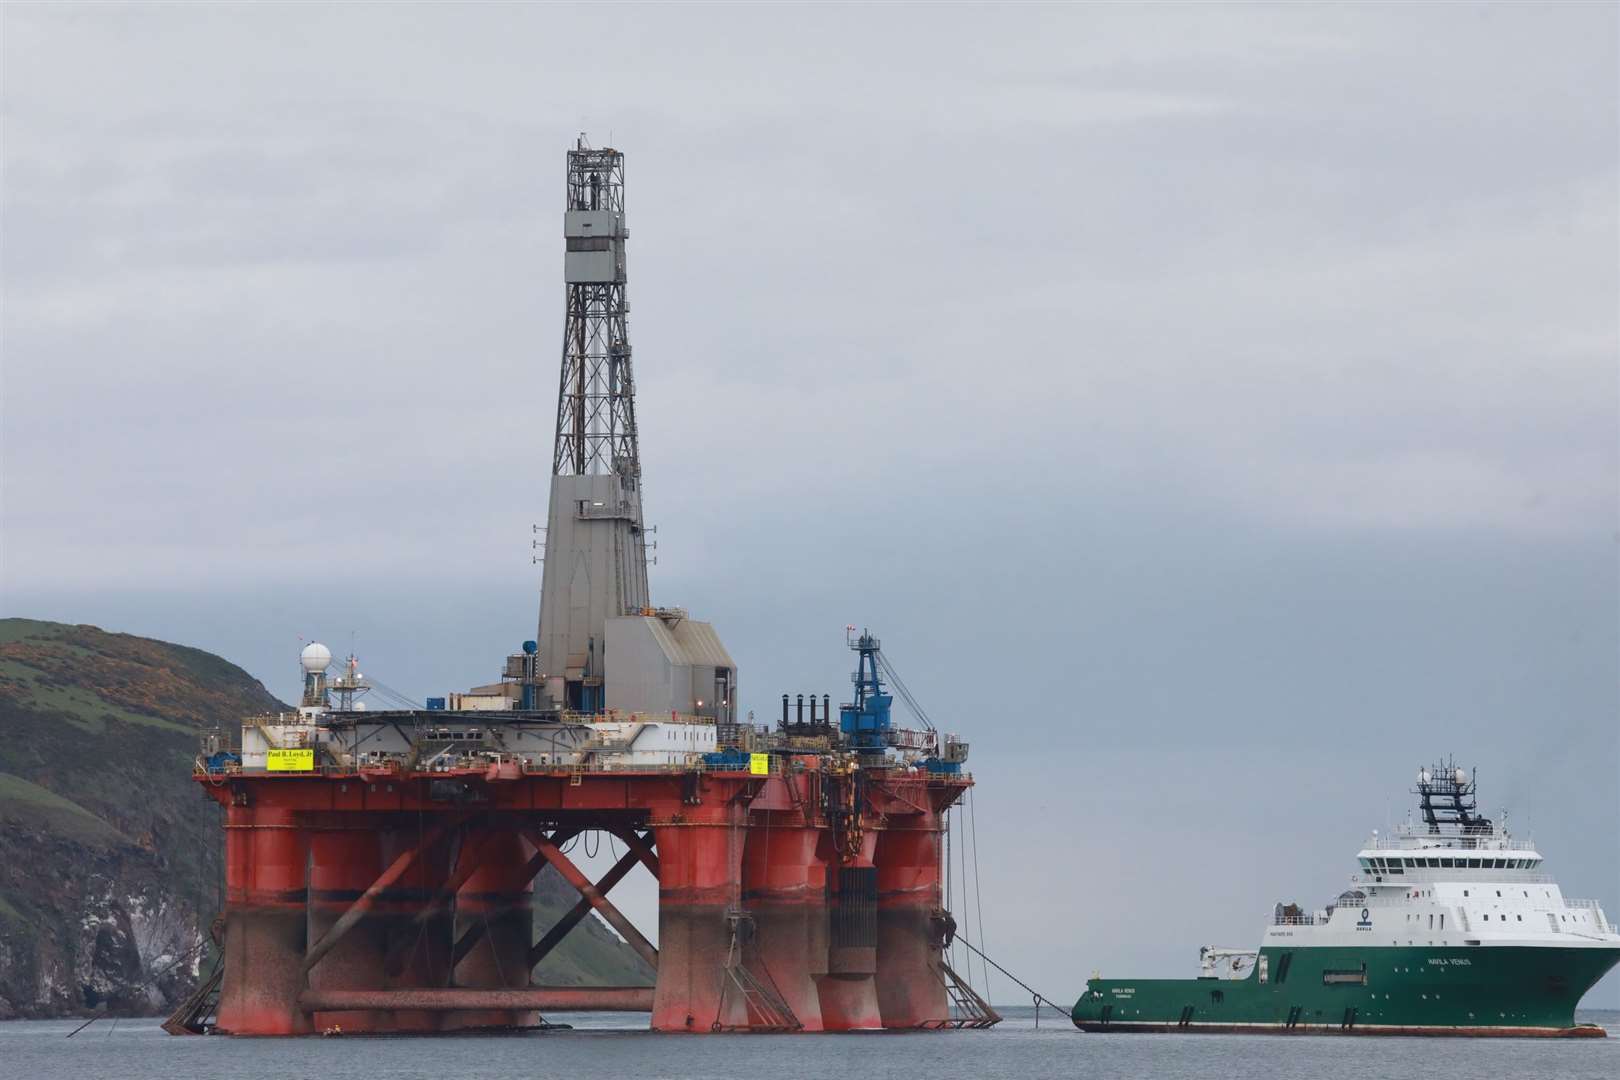 Protesters climbed on board the rig in the Cromarty Firth (Greenpeace/PA)